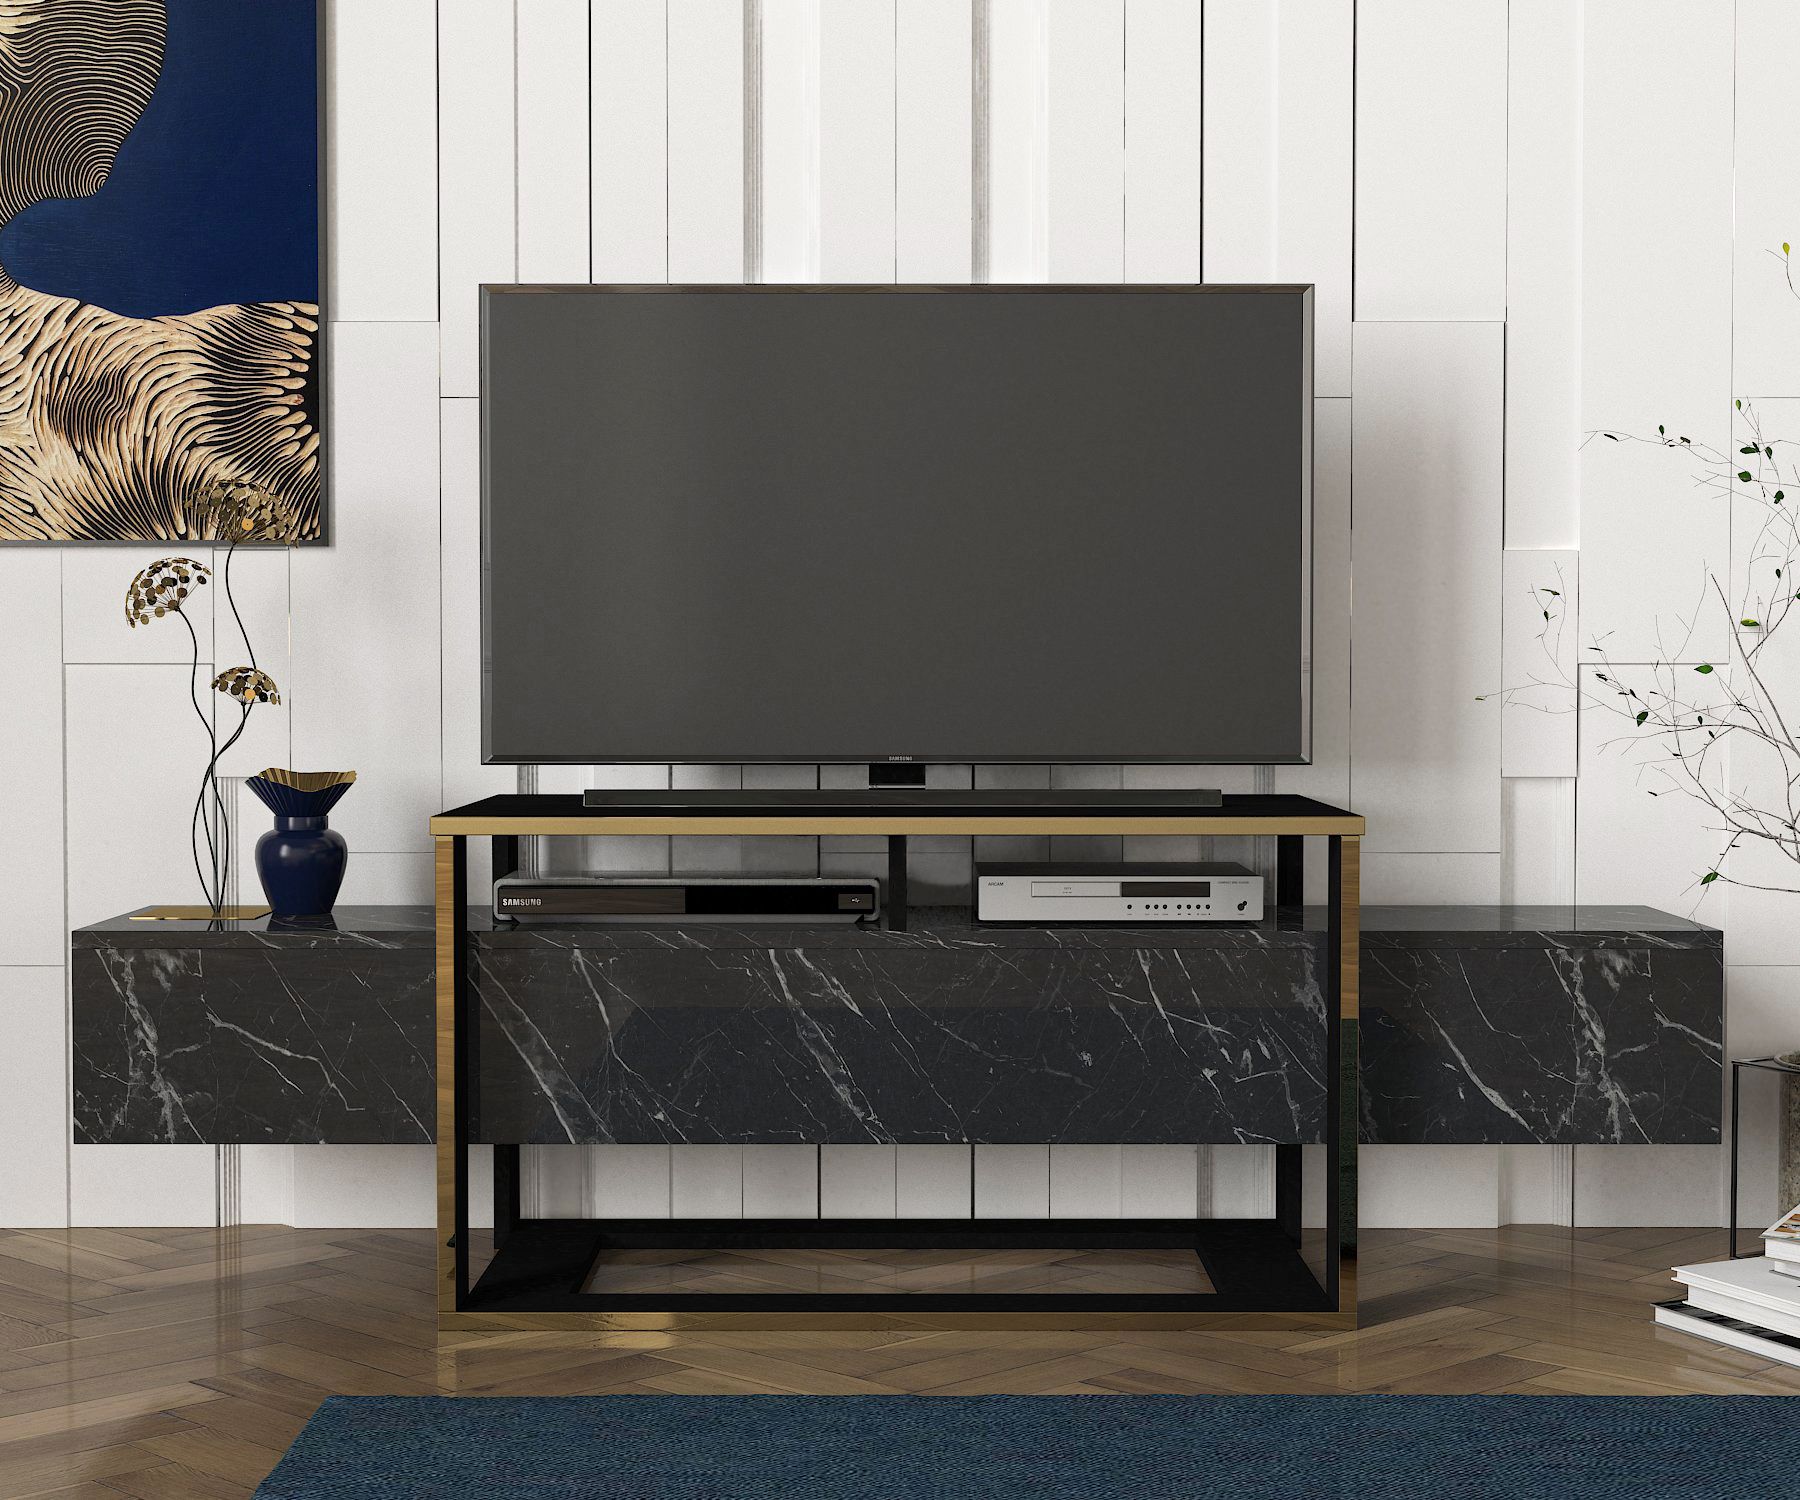 Sayre Bianco Unique Tv Stand, Black Marble Shelf Design Intended For Unusual Tv Cabinets (View 4 of 15)